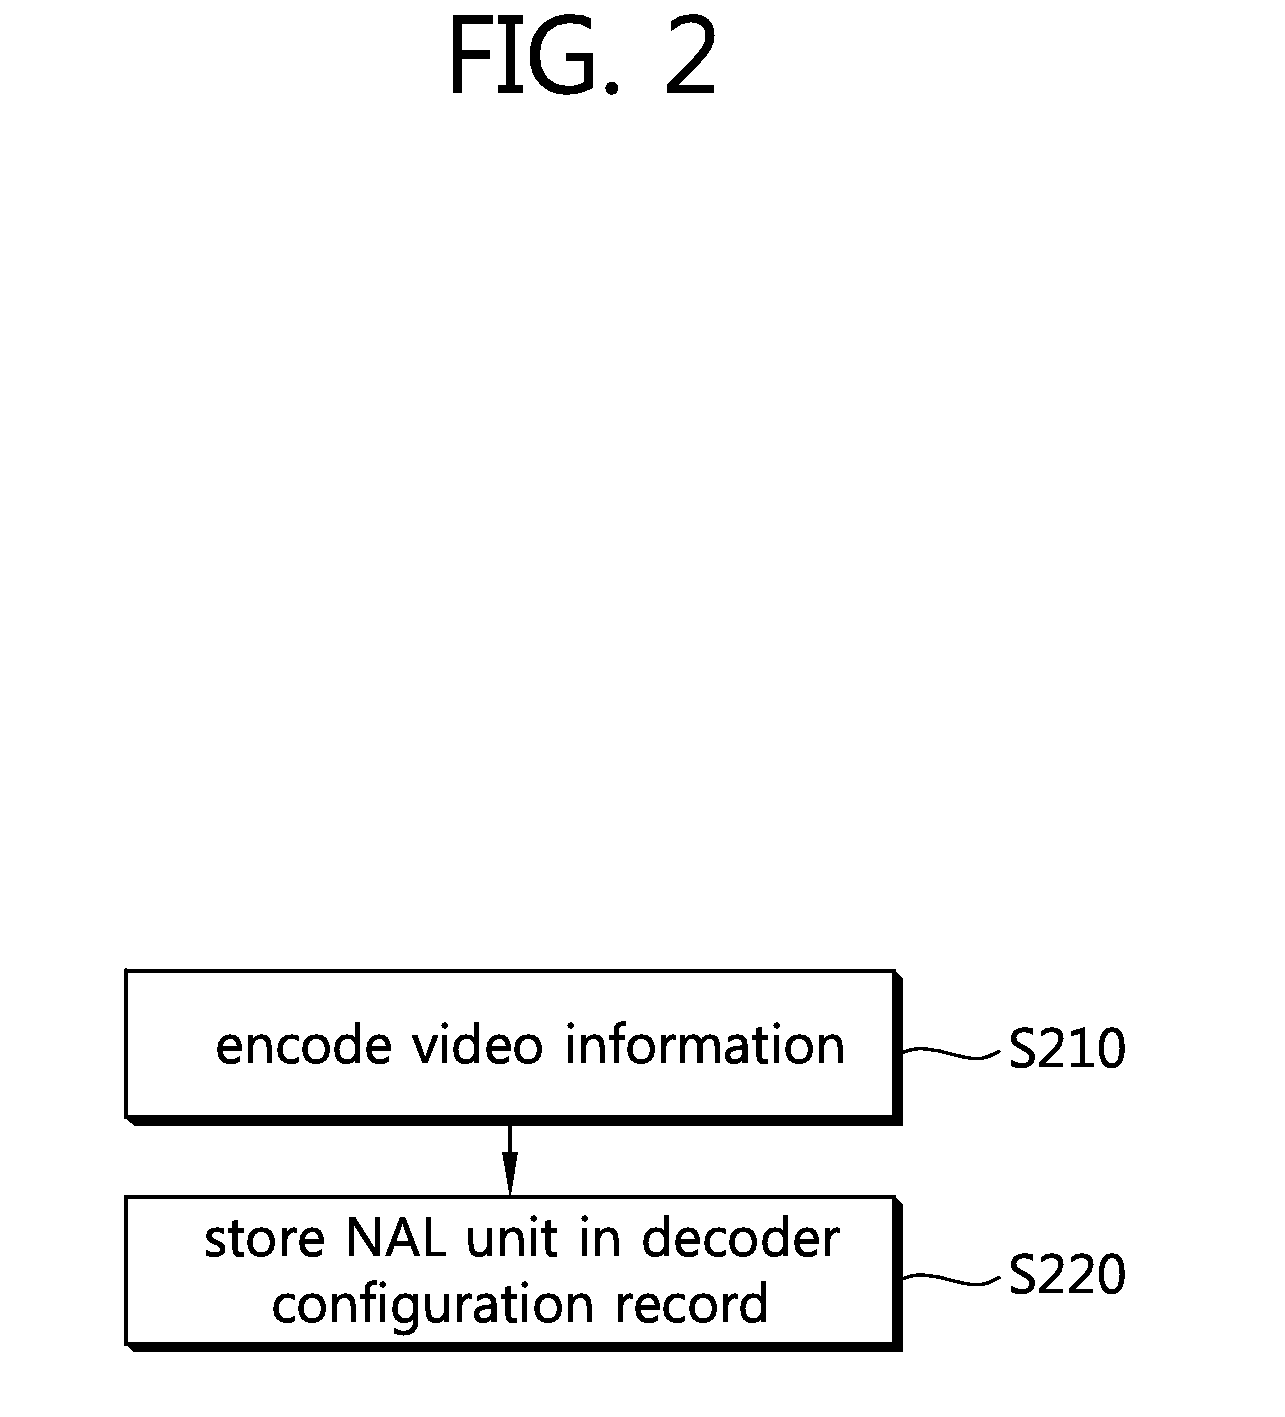 Method for storing image data, method for parsing image data, and an apparatus for using the same